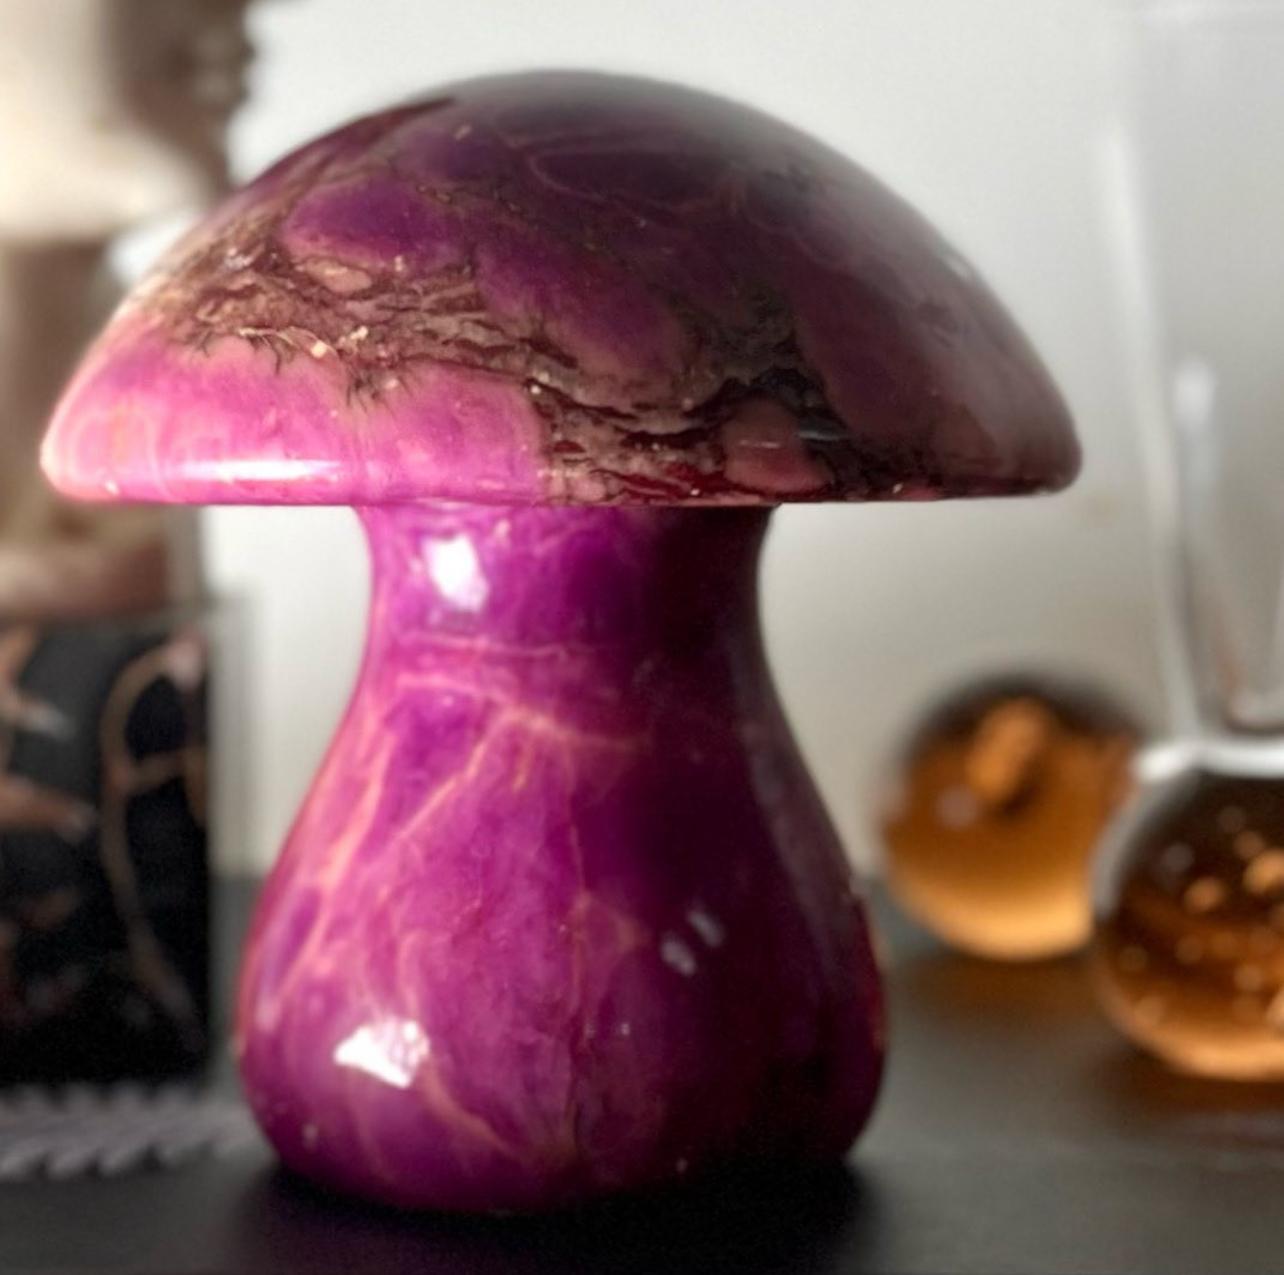 A monumental vintage Italian marble mushroom paperweight / objet d’art. In rare tones of magenta with pewter veining. A repair is apparent when examined from below. Pick up in central west Los Angeles or we ship worldwide.
3.75” diameter X 4.3” h
